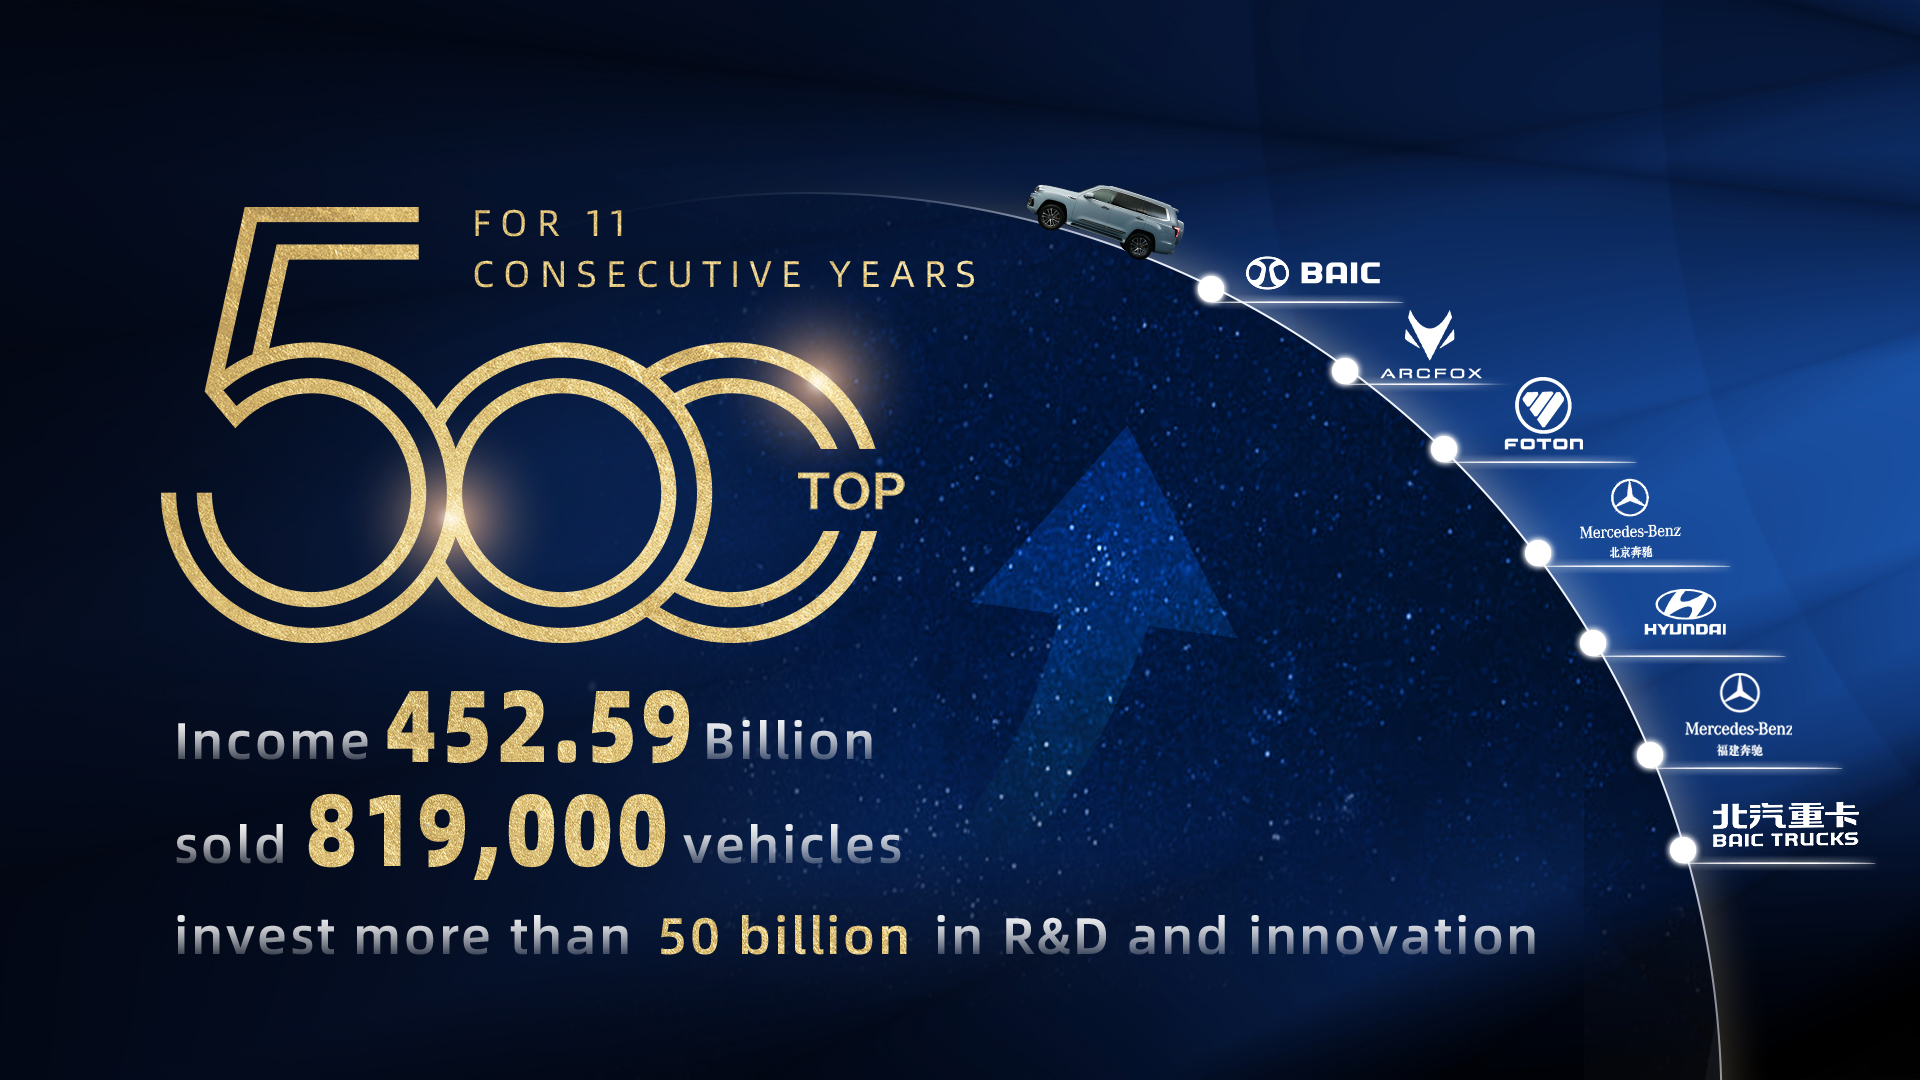 BAIC Group Selected for the Fortune Global 500 for 11 Consecutive Years